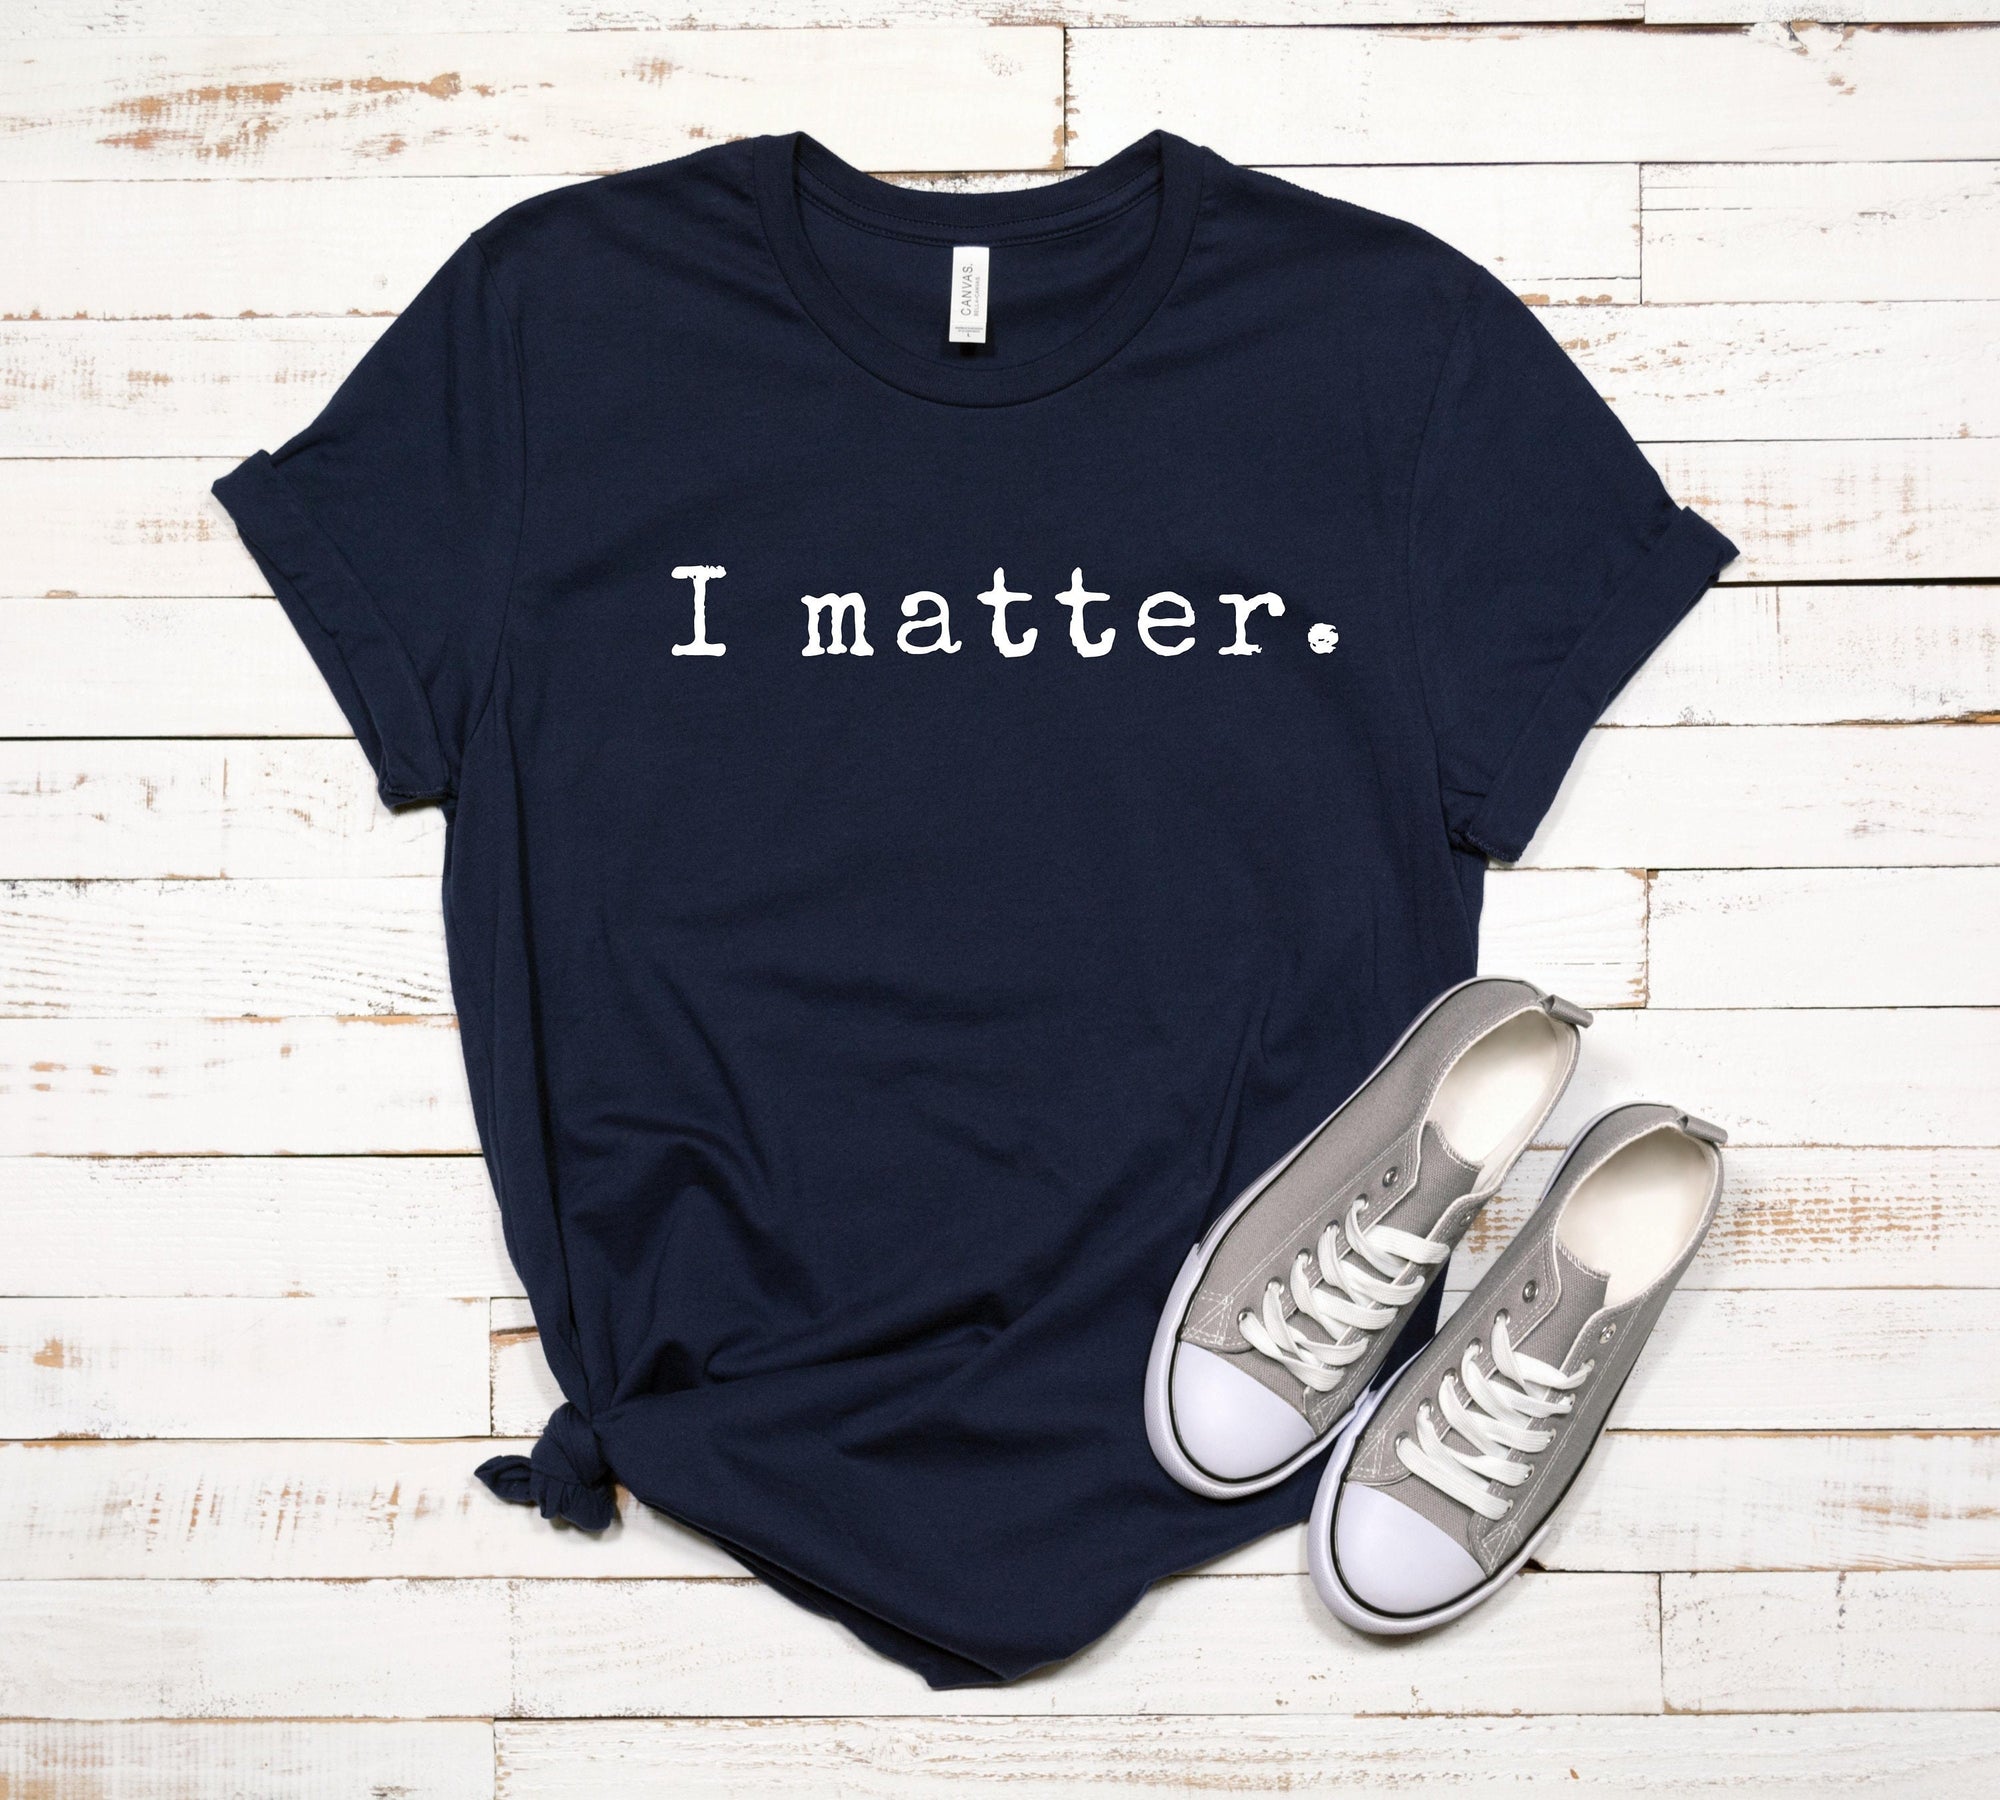 Black lives Matter I Matter Shirt No Justice No Peace Protest Shirt for Equality Enough is Enough Shirt Unisex Plus Size Avail